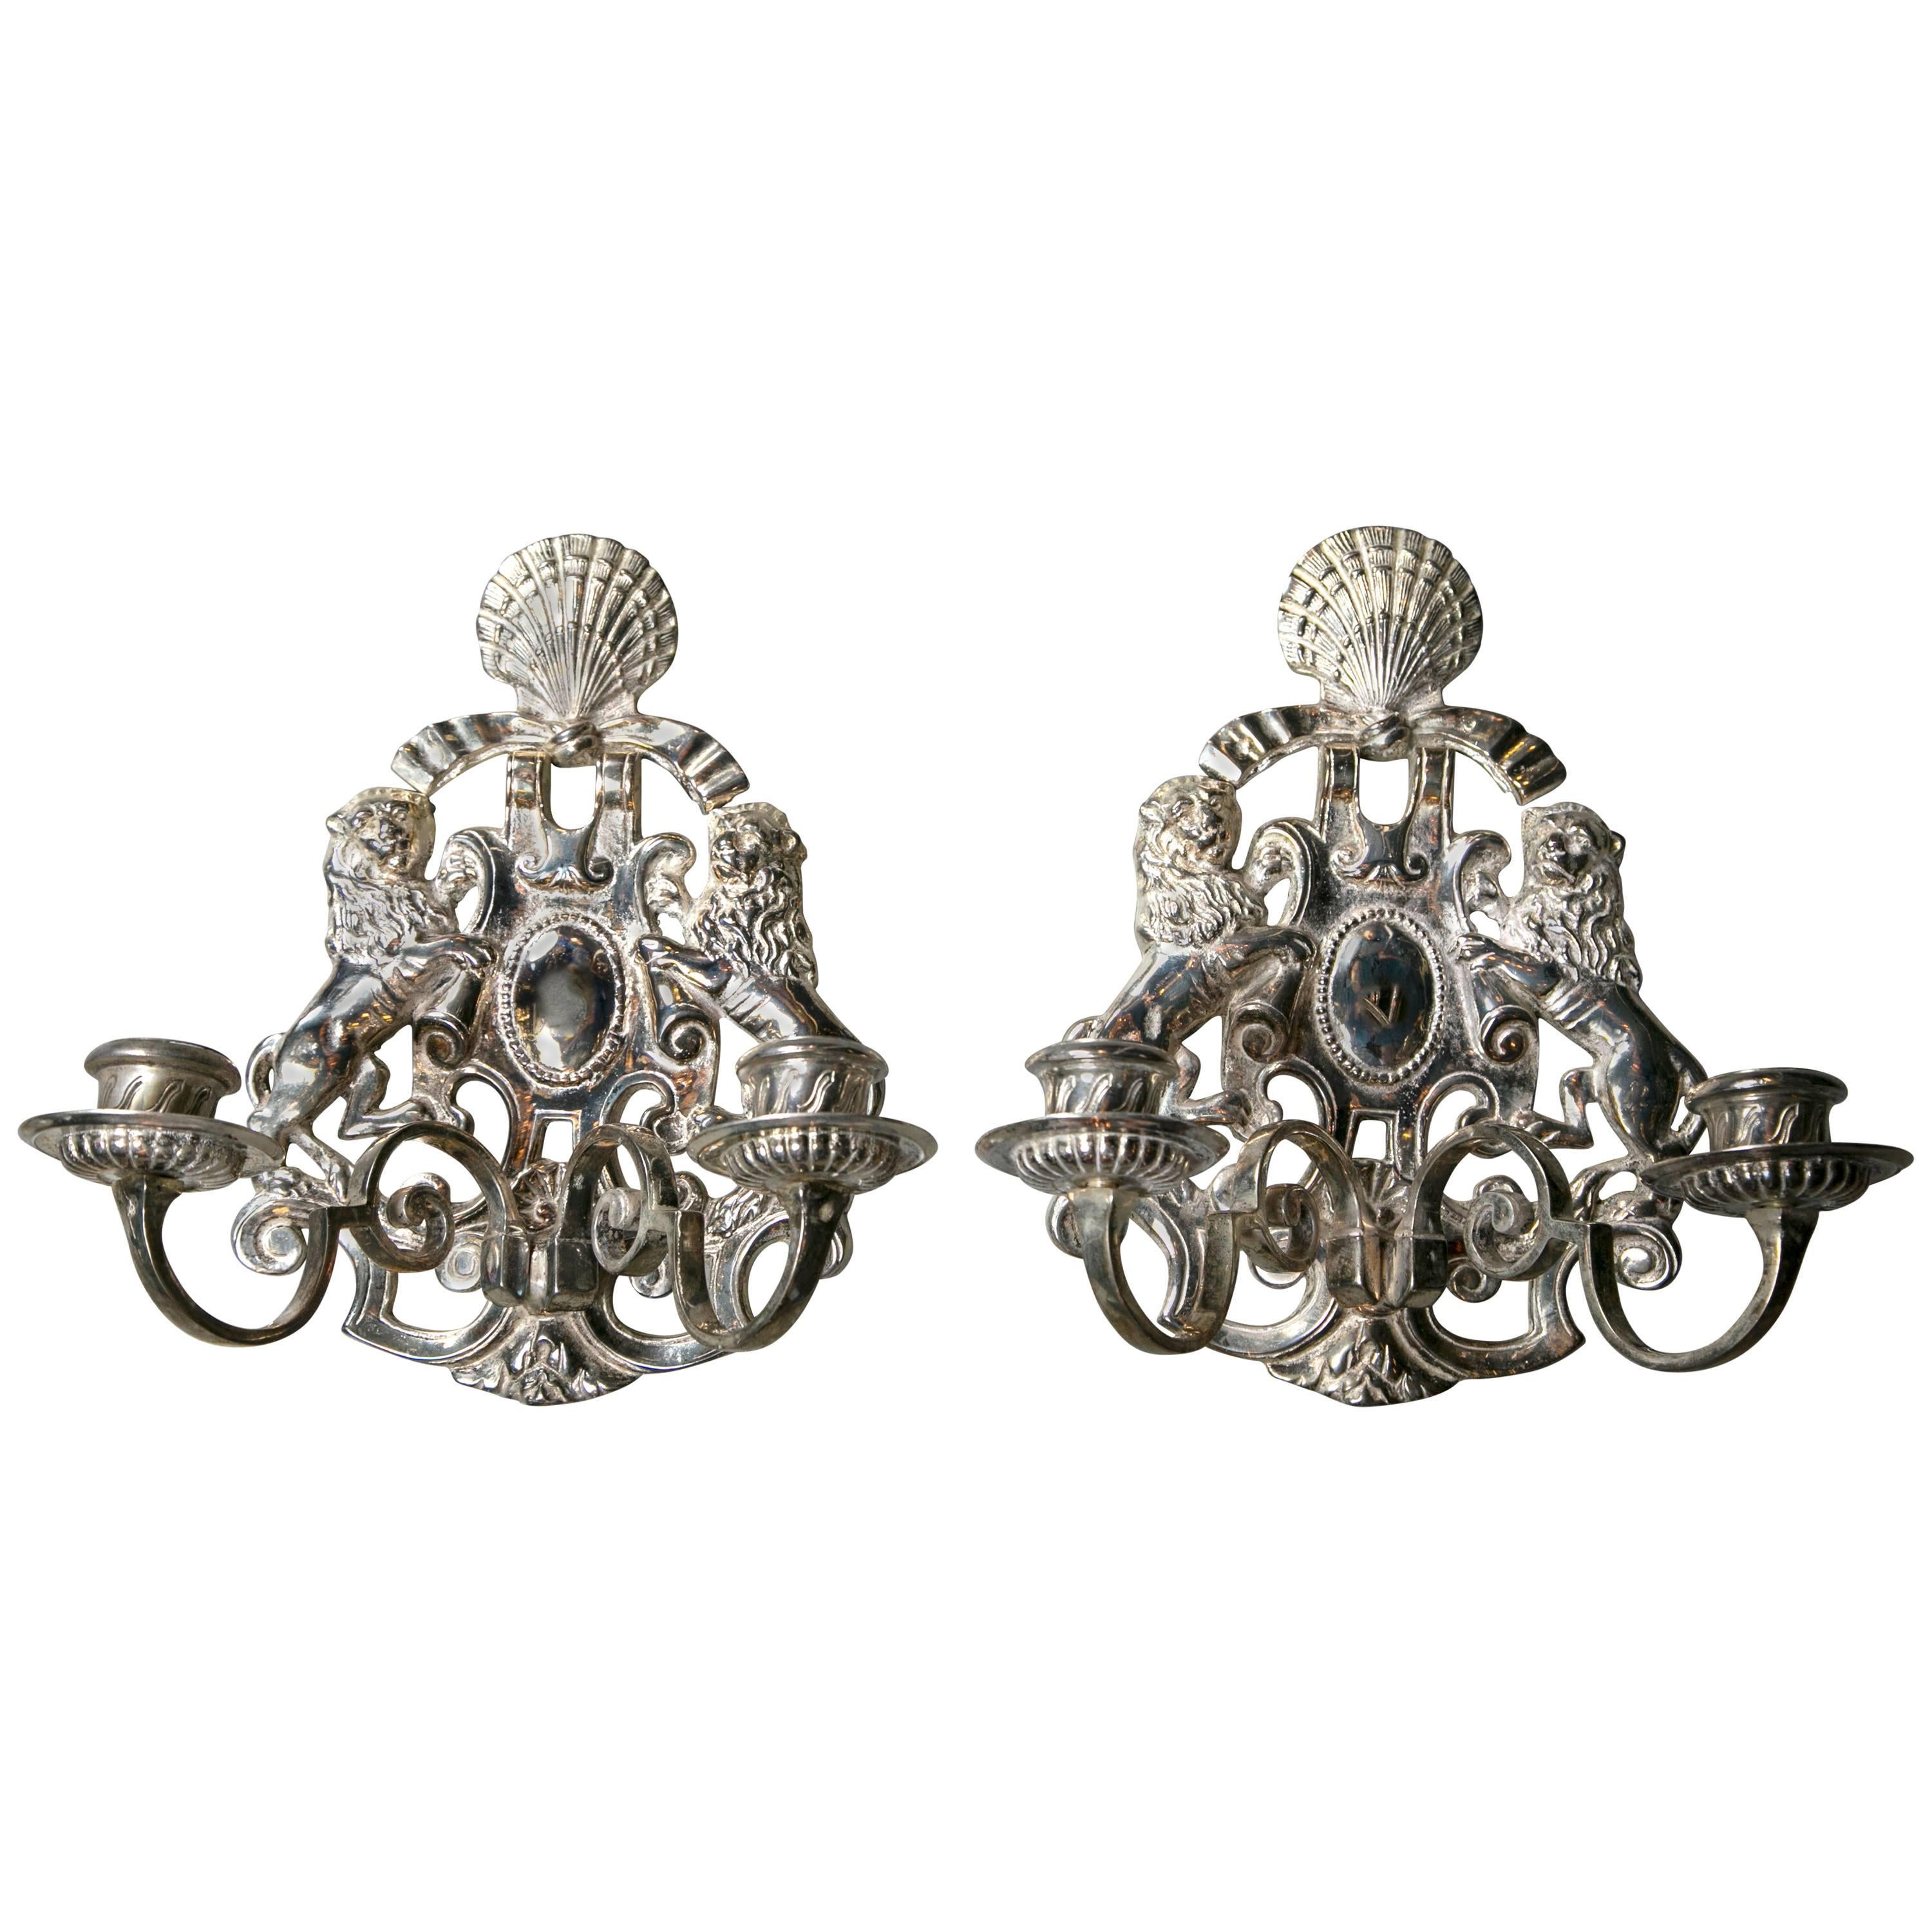 Caldwell Silver Plated Sconces For Sale